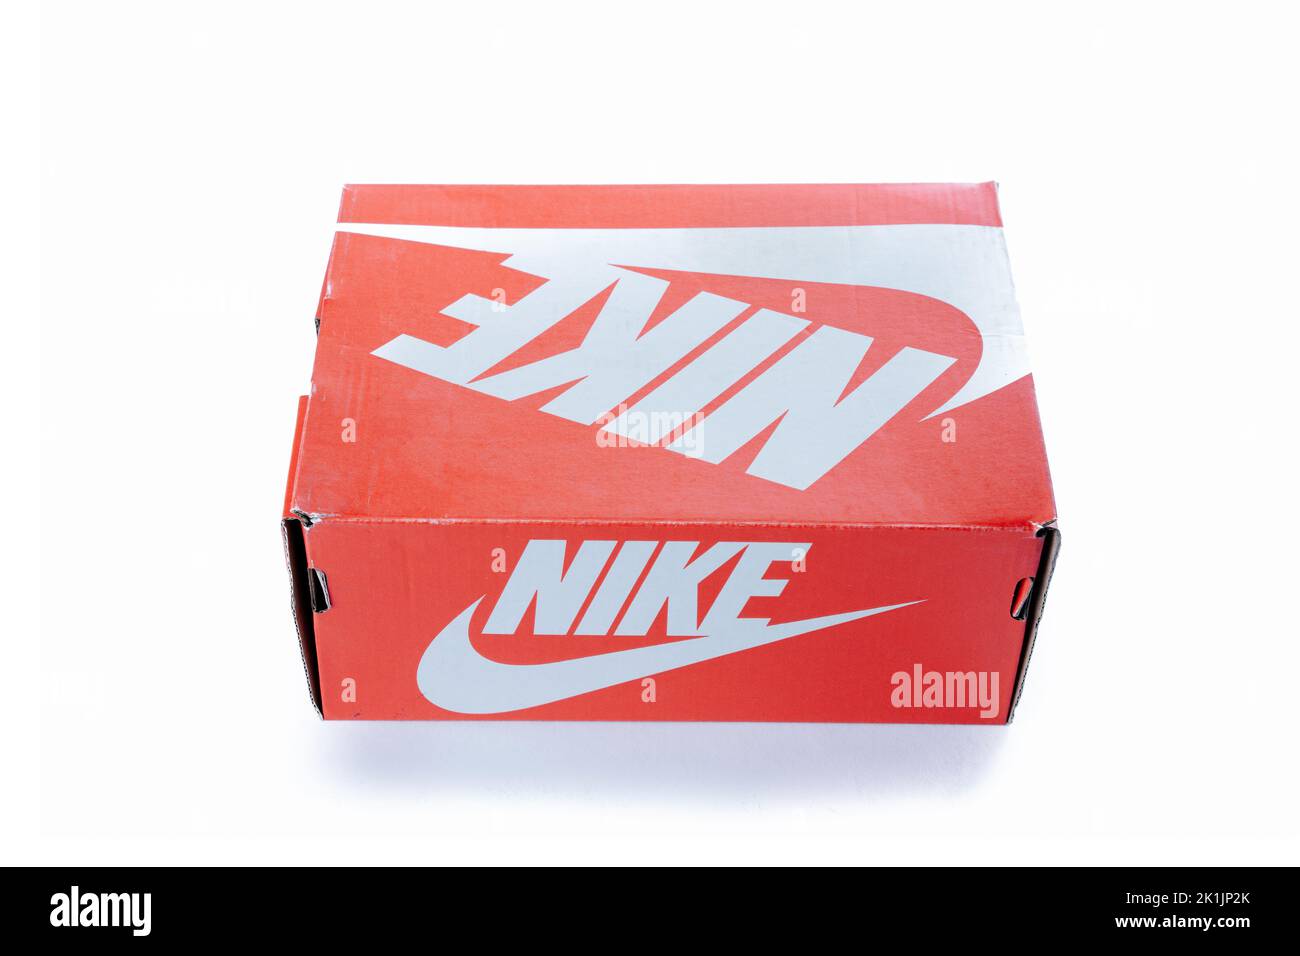 Cyprus, Paphos - SEPTEMBER 08, 2022: Nike red box of footwear from famous sportswear brand. diagonaly placed. Over white background. Stock Photo